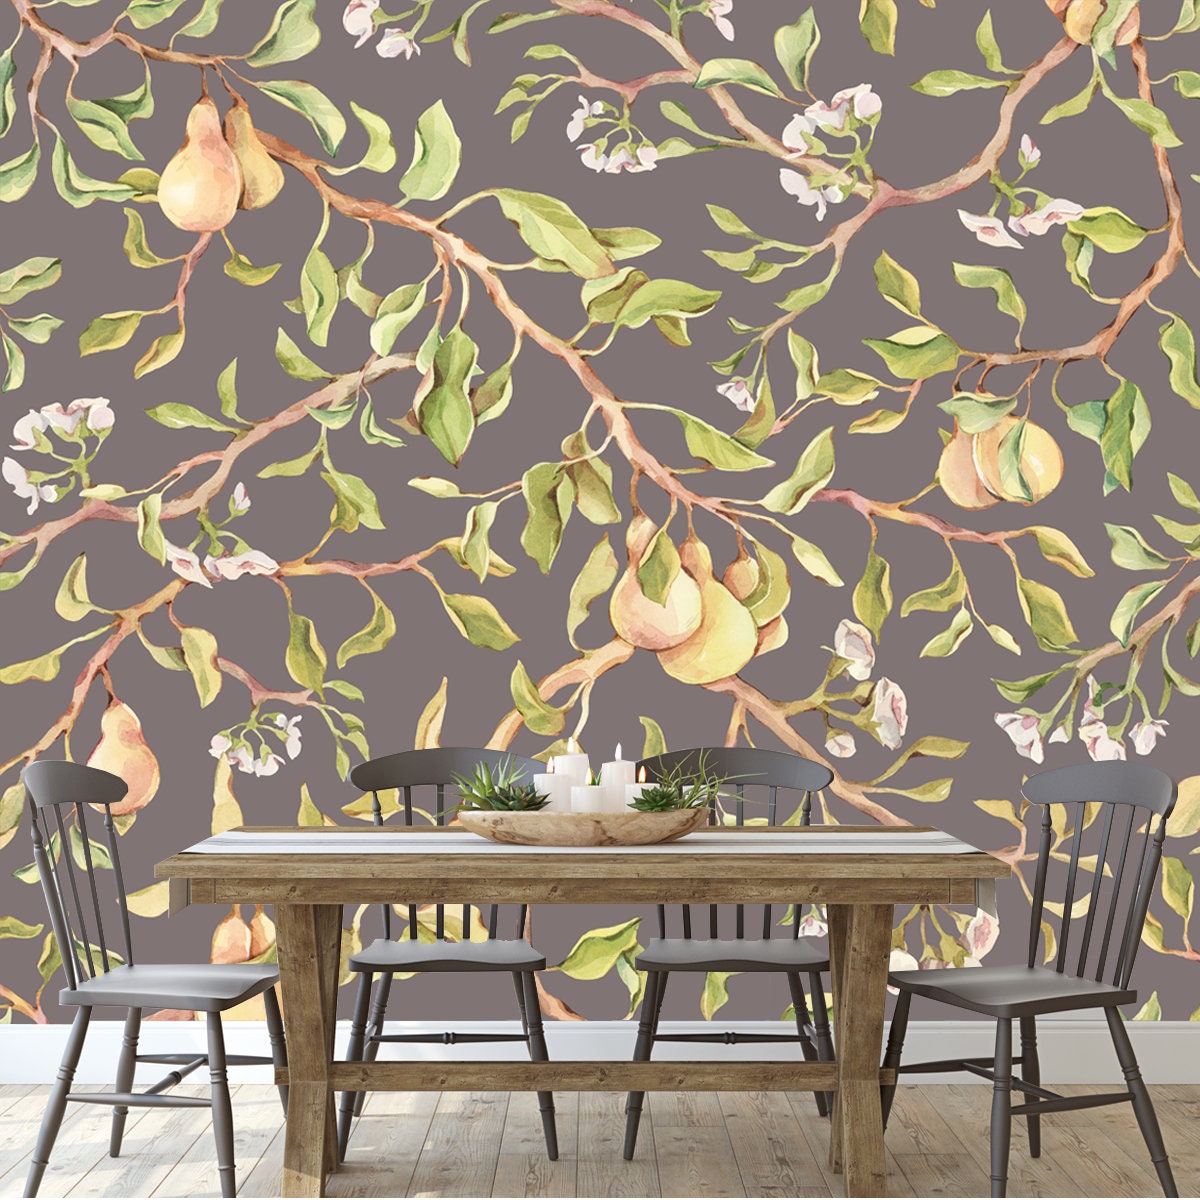 Seamless Pattern on a Brown Background with Branches, White Flowers and Ripe Yellow Pear Fruits. Painted in Watercolor Dining Room Mural